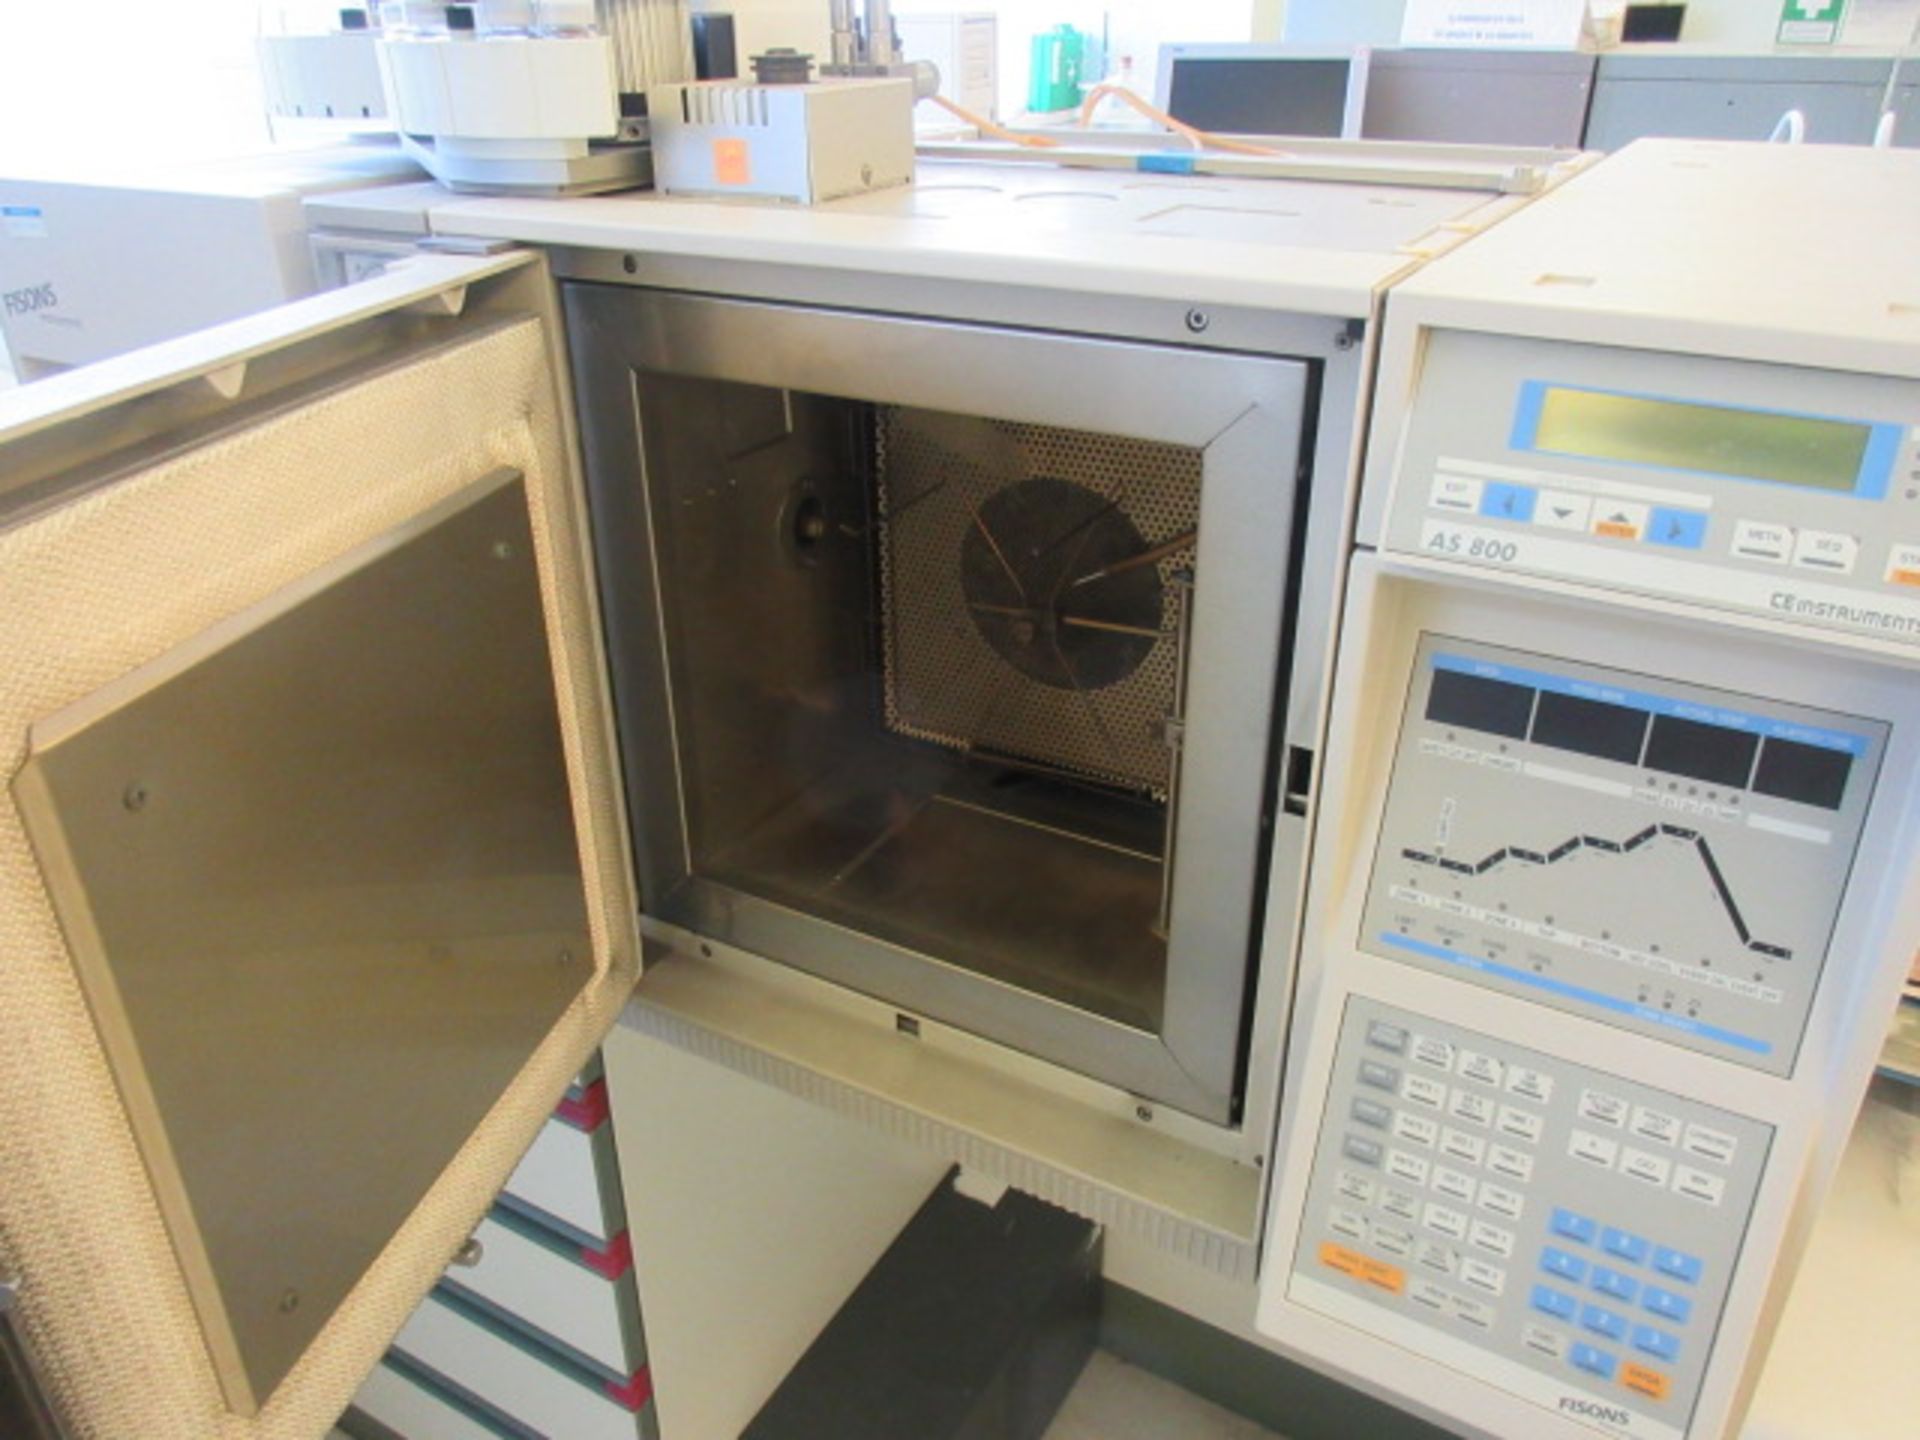 FISON INSTRUMENTS MD 800 MASS LAB LIQUID SAMPLER WITH GC 8000 SERIES OVEN - Image 2 of 3